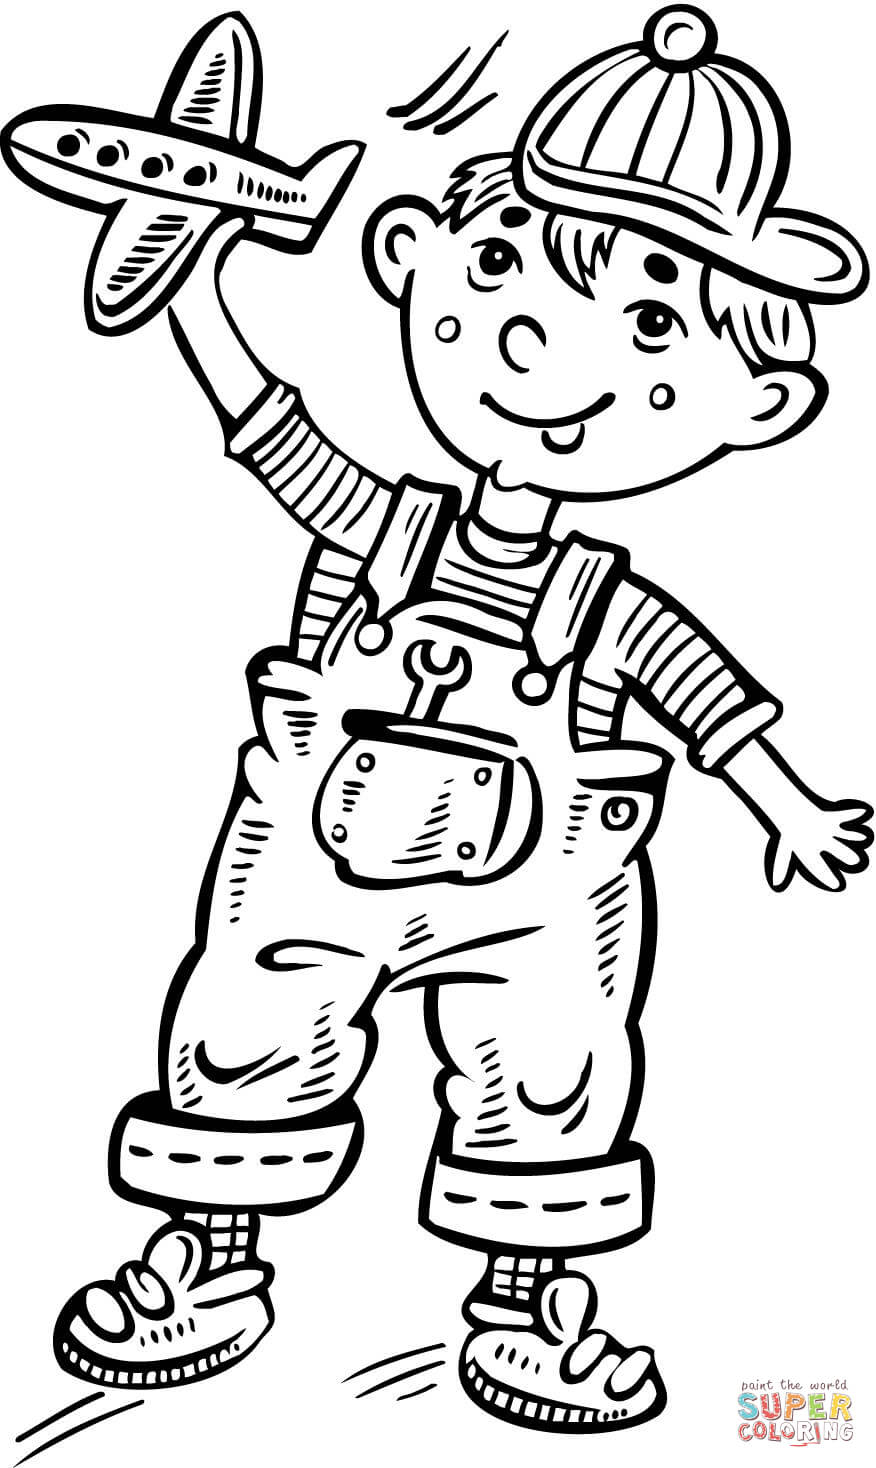 Little Boy Coloring Pages Little Boy Playing With A Toy Plane Coloring Page Free Printable